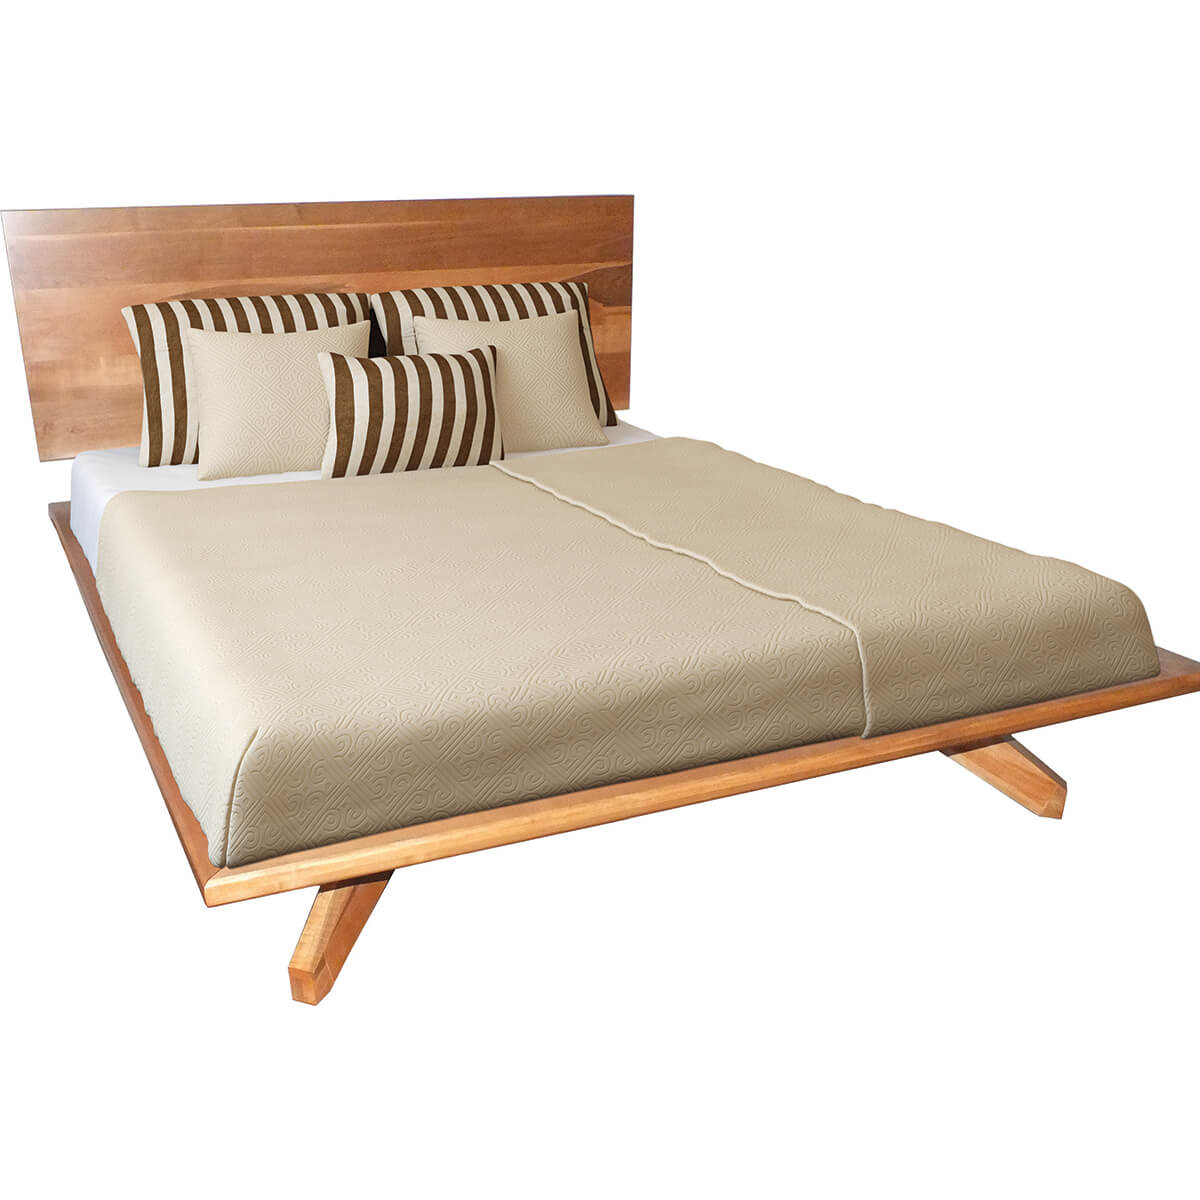 Read more about the article Platform Mid-Century Bed